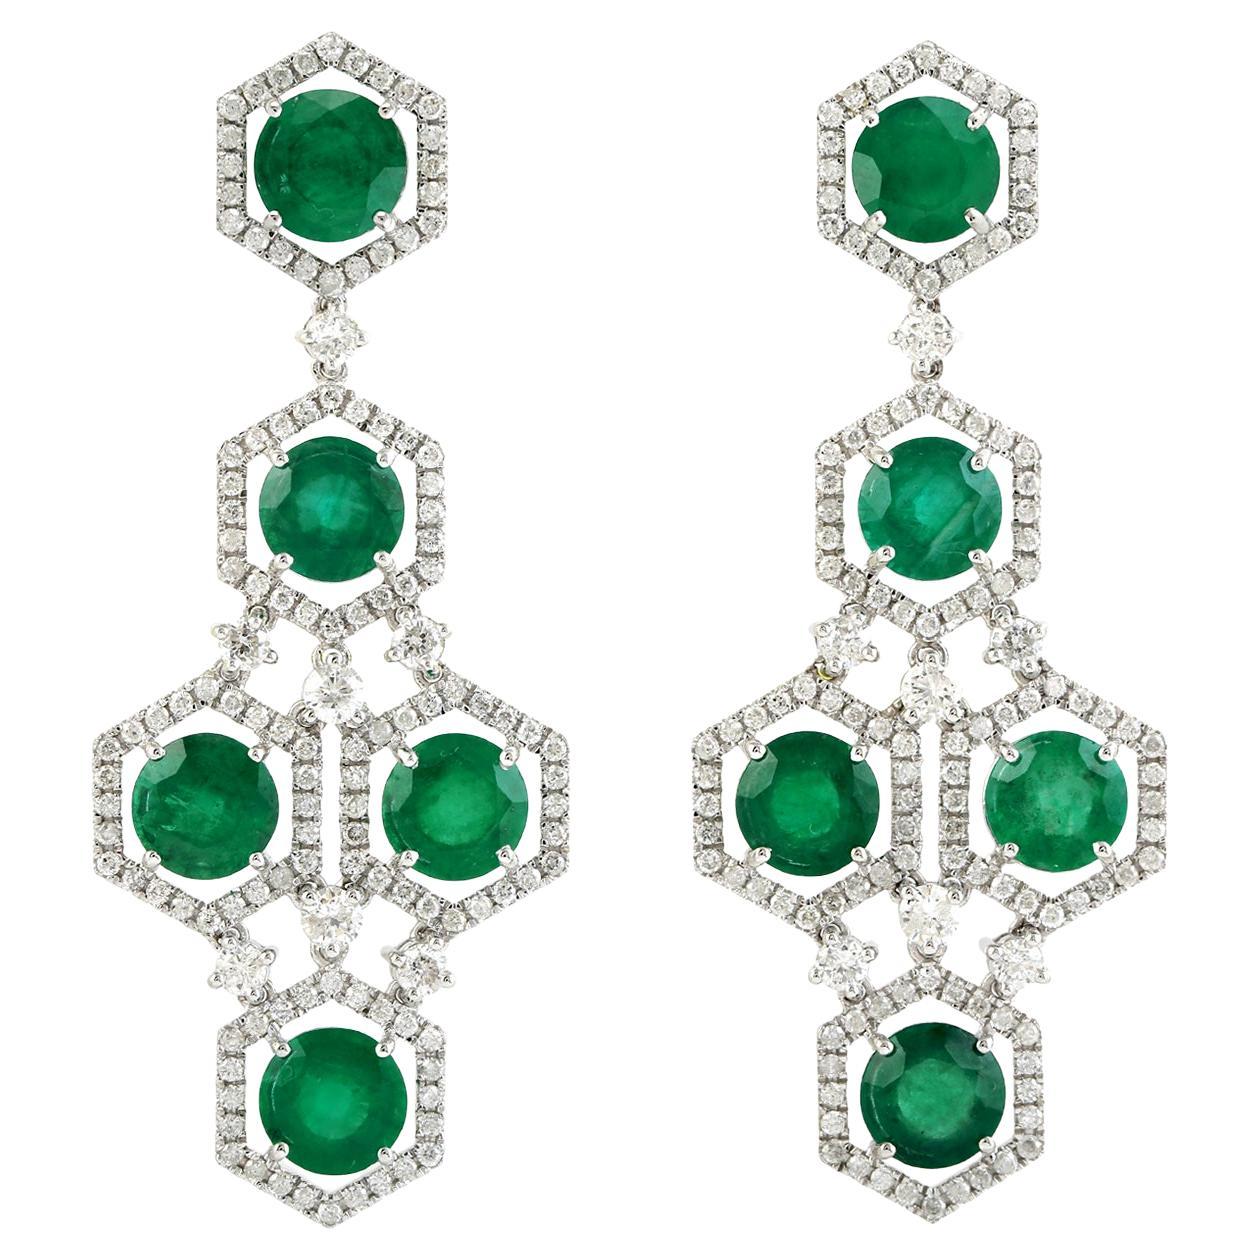 Round Emerald Long Earrings With Diamonds Made In 18k White Gold